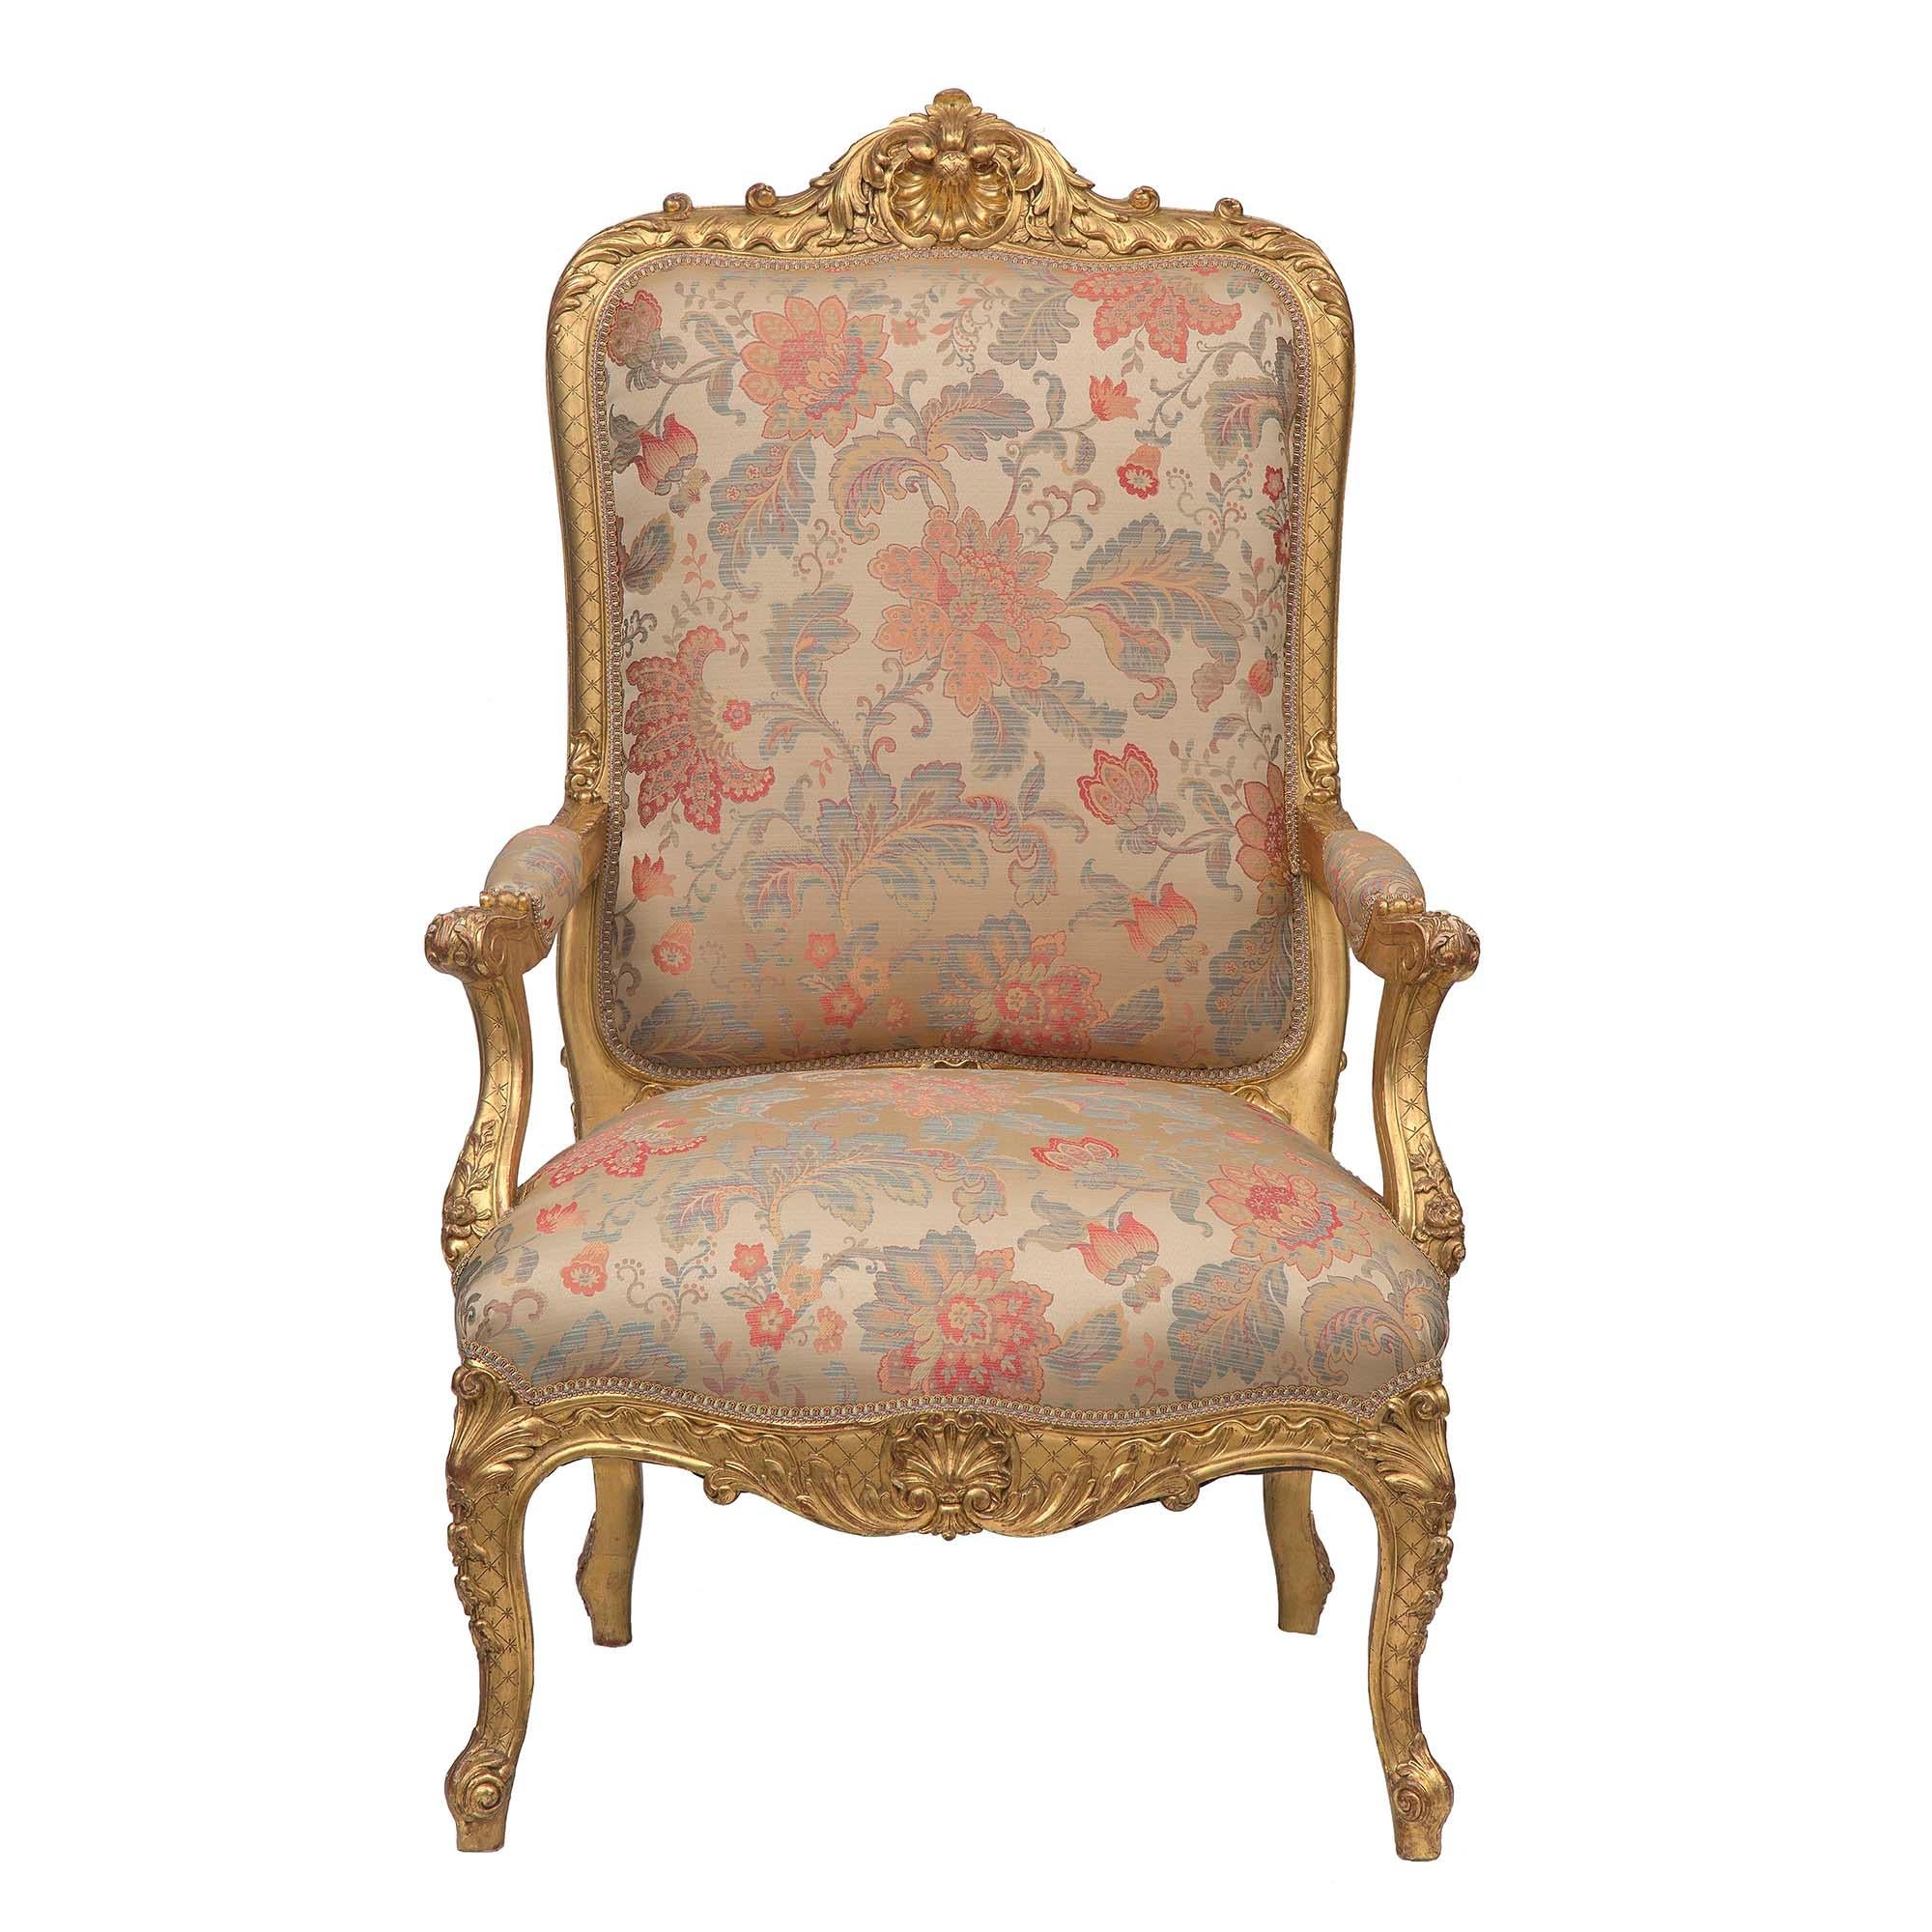 A sensational and large scale pair of French 19th century Louis XV st. giltwood high back armchairs. Each is raised by handsome and richly carved cabriole legs with an elegant lattice designed background and large acanthus leaves and rosettes. The